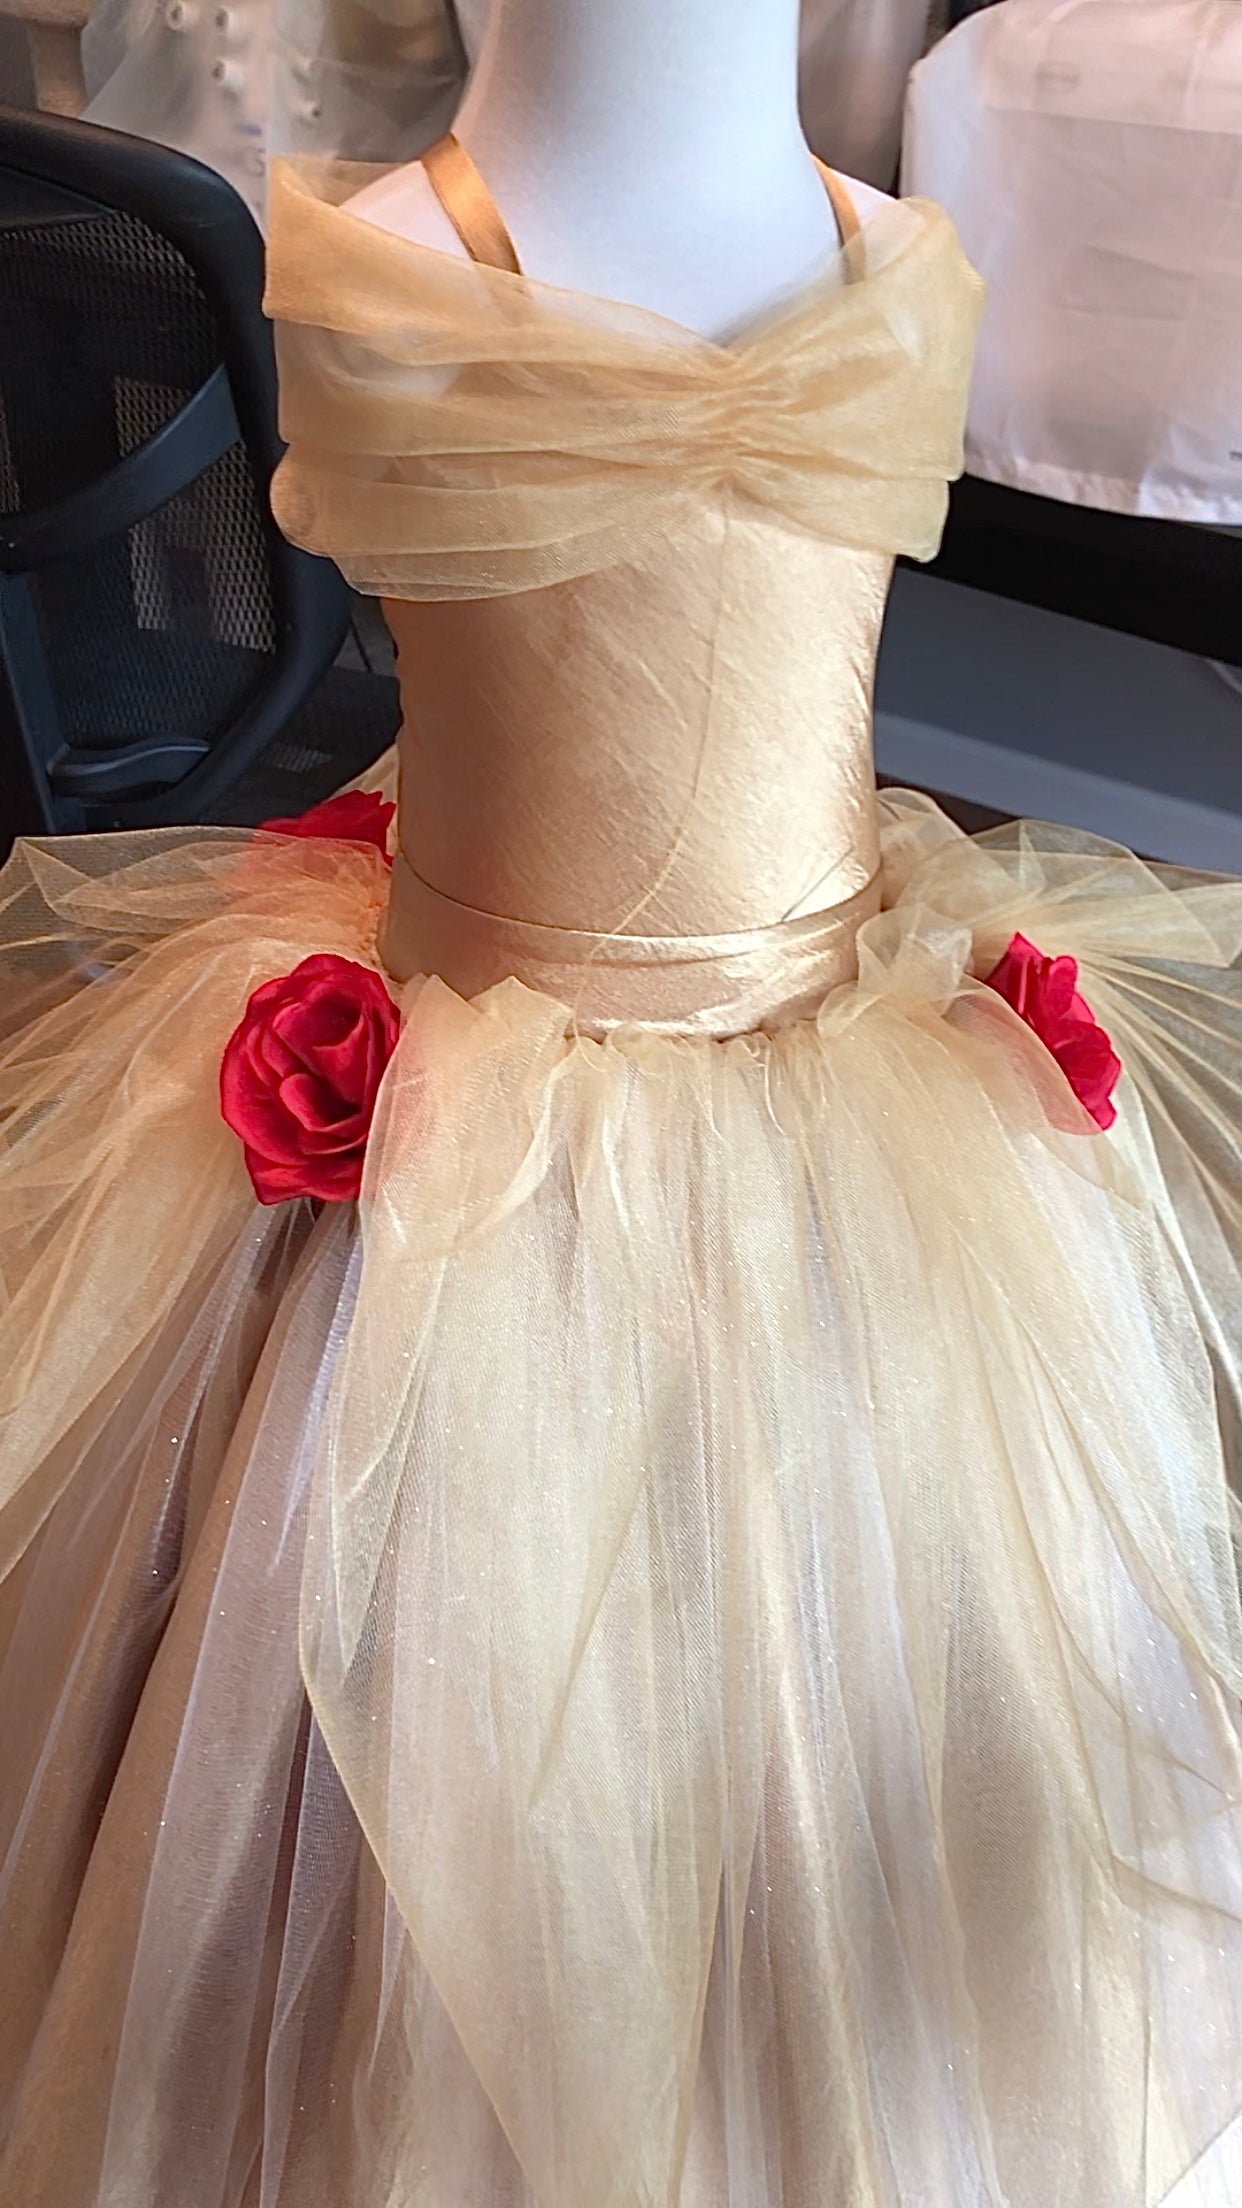 Bella’s Ball Gown starts at $350.00